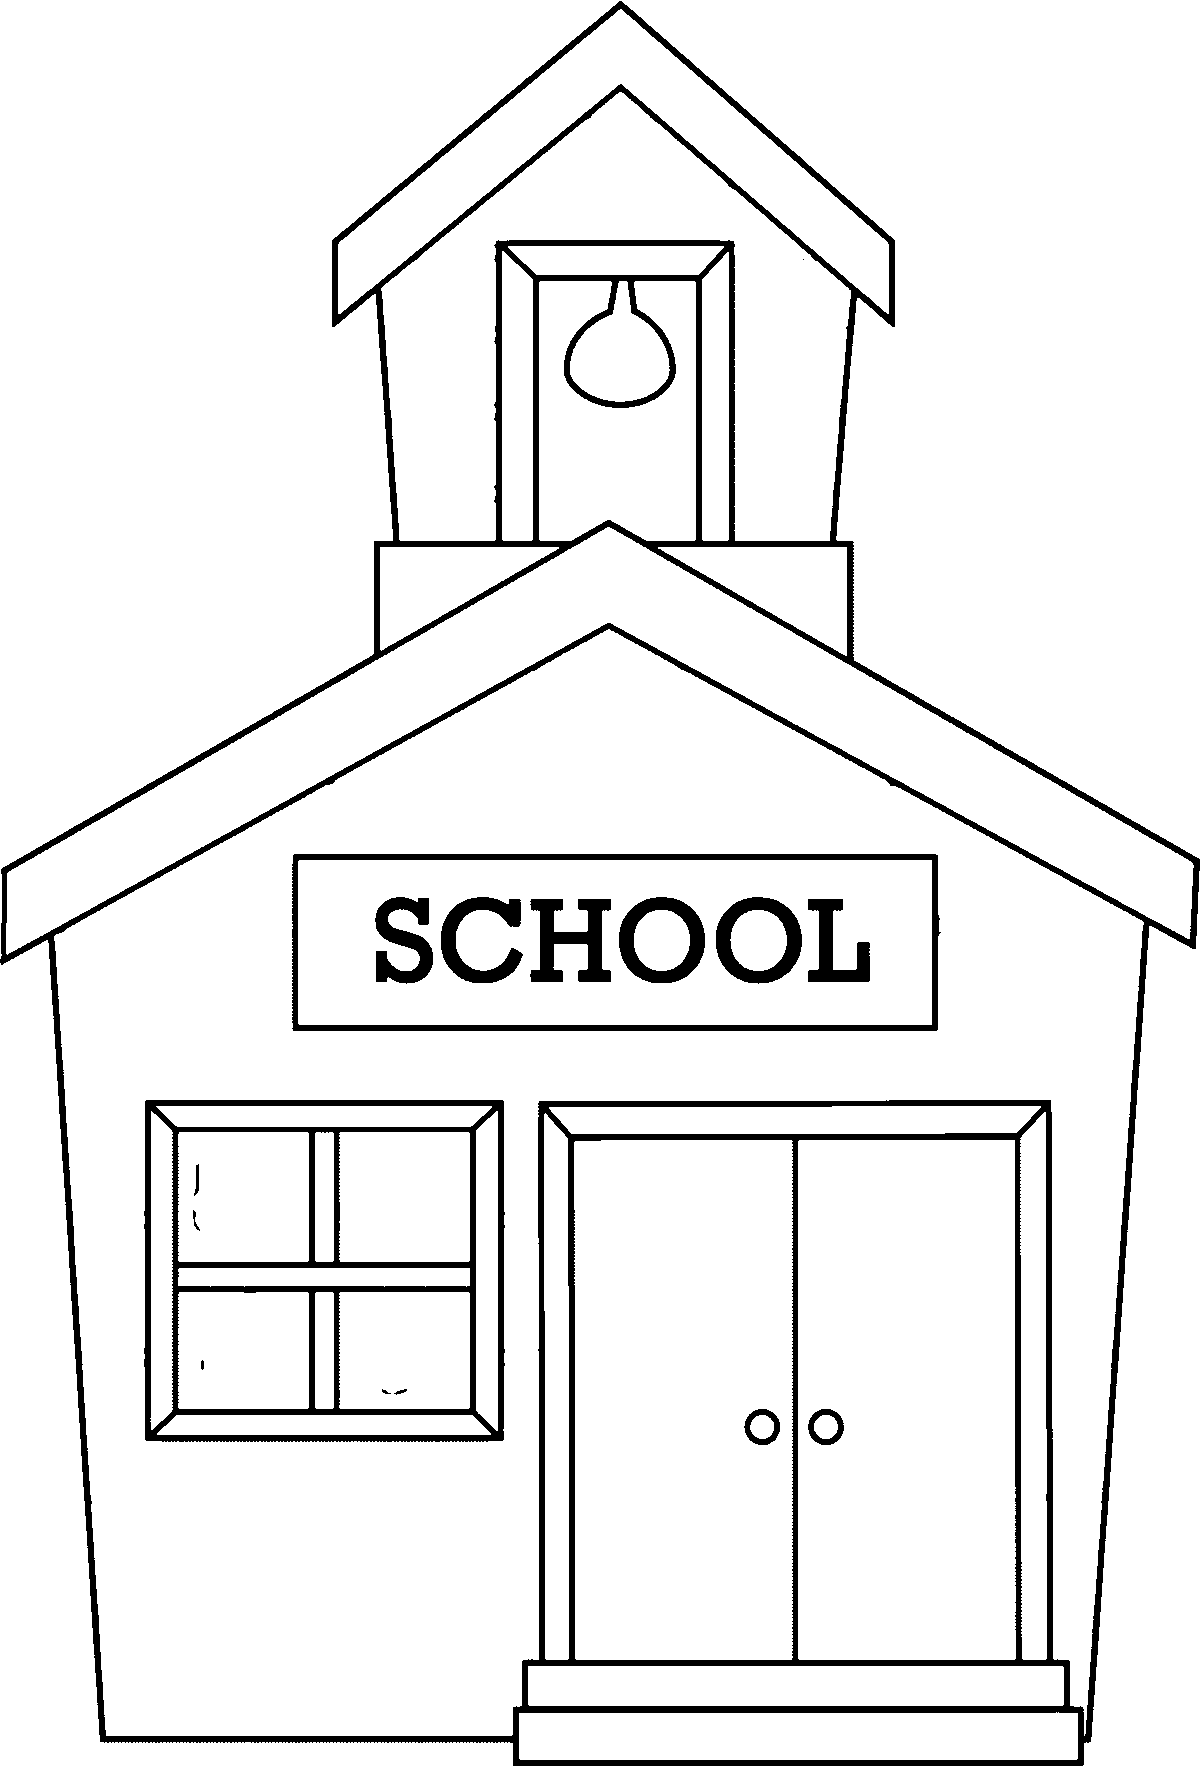 school-building-coloring-pages-wecoloringpage-coloring-home